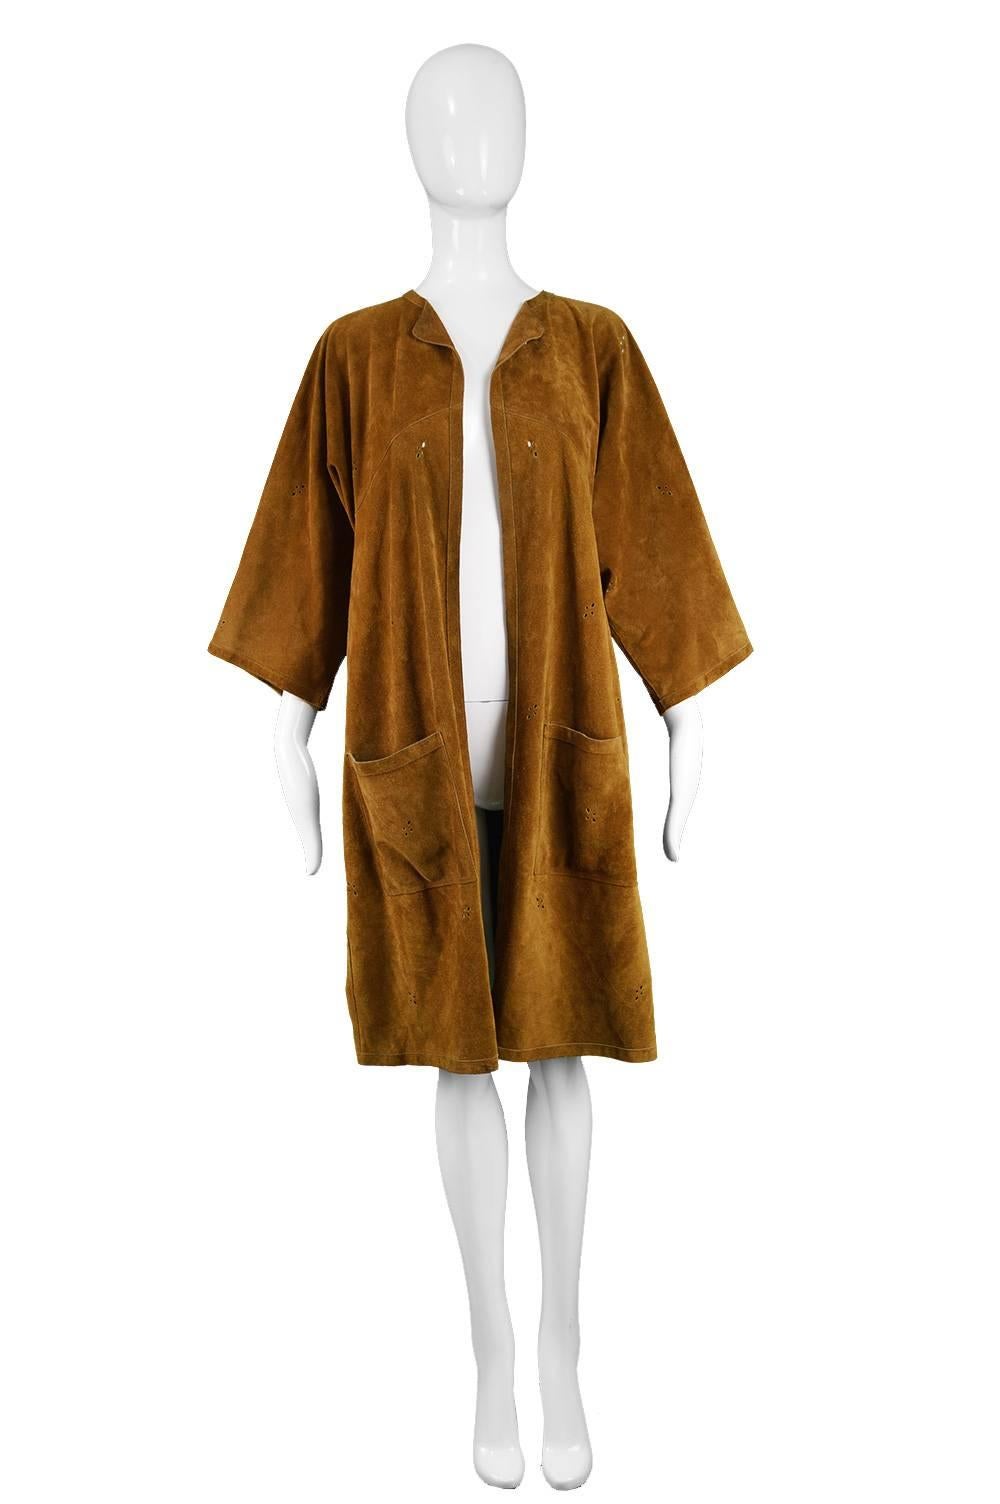 Jean Muir Vintage 1970s Punchwork Brown Suede Duster Jacket

Size: Marked UK 12 / US 10 but would suit a women's Small to Medium due to loose open fit
Bust - up to 38